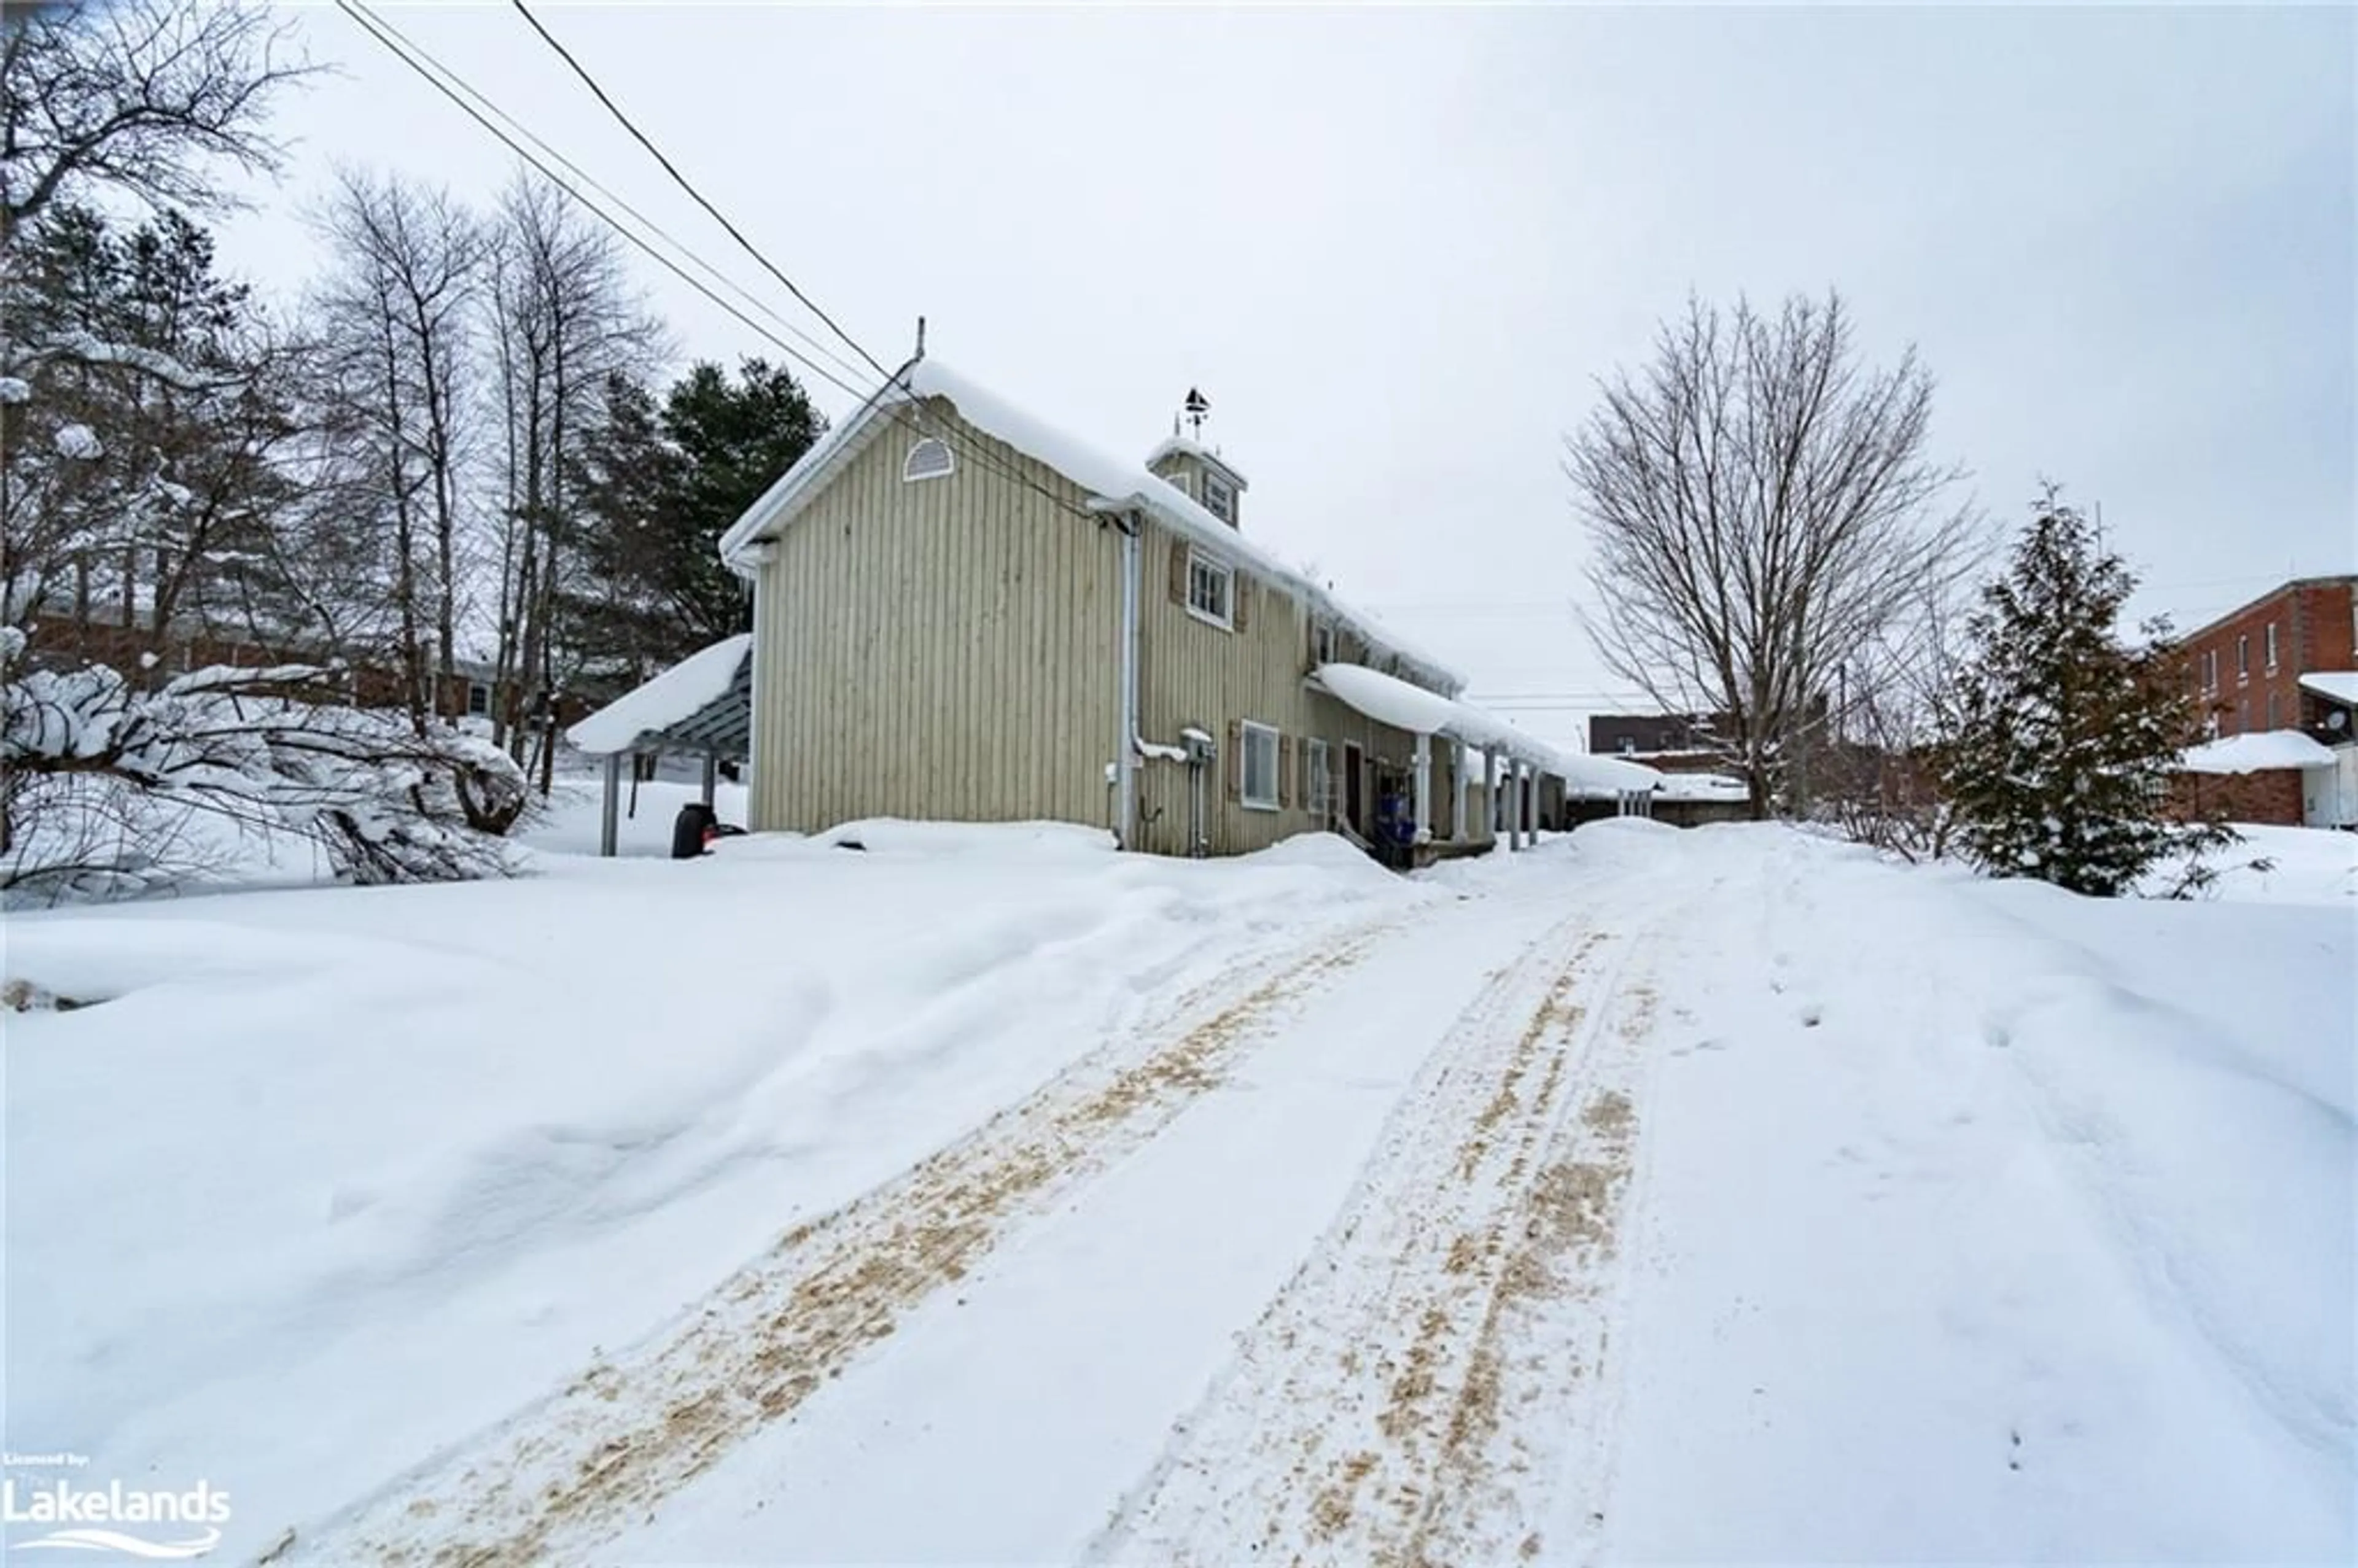 Street view for 35 Copeland St, Burk's Falls Ontario P0A 1C0